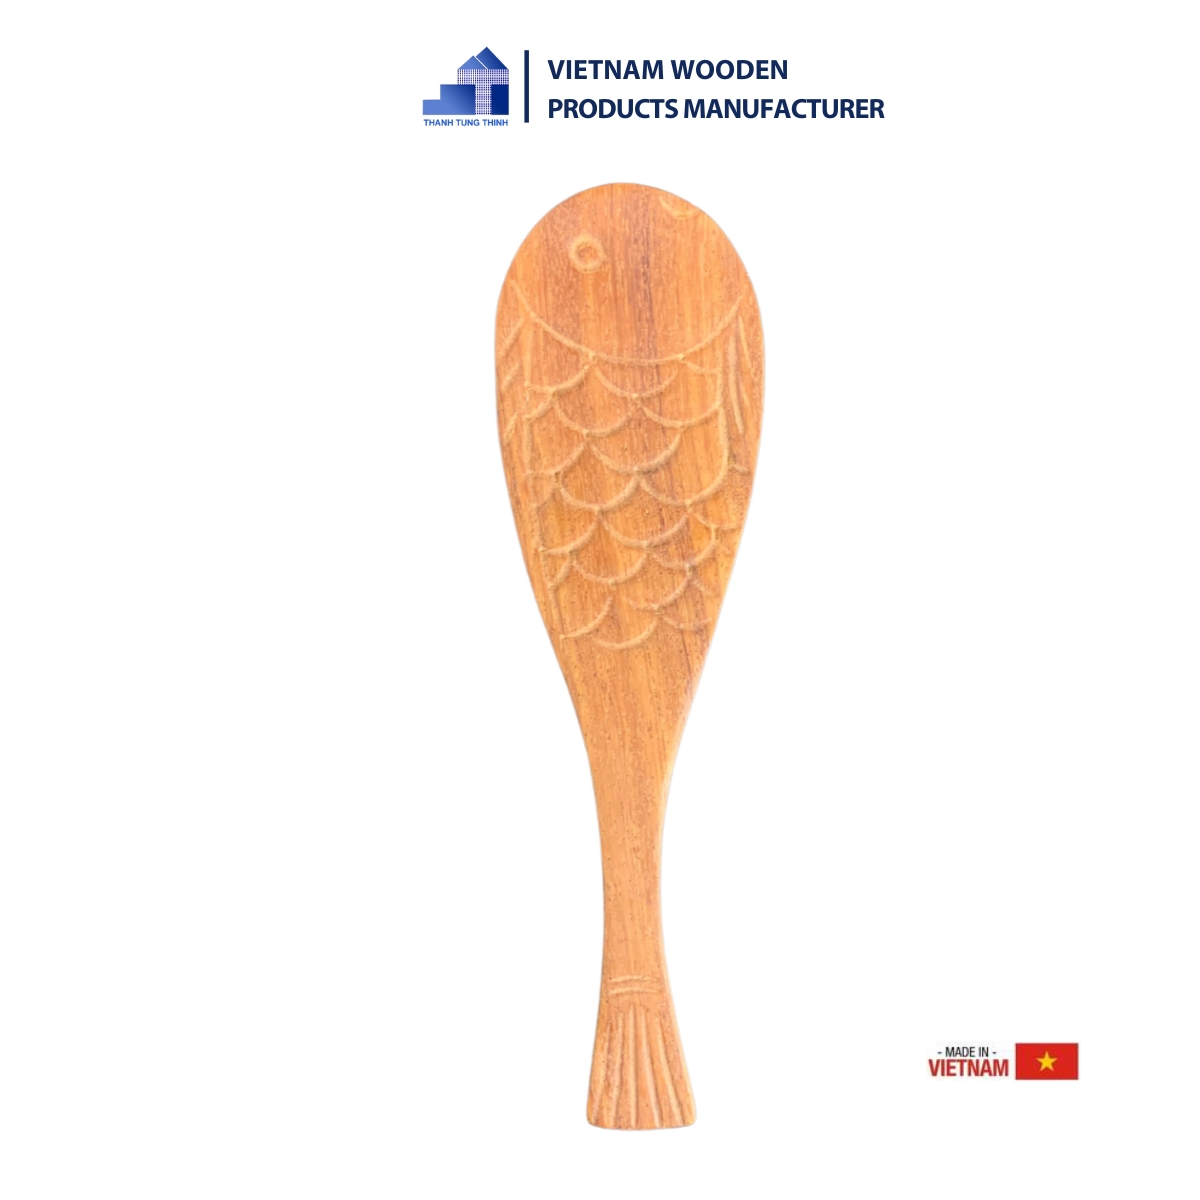 The product's rice scoop is made of wood and features a fish-shaped design